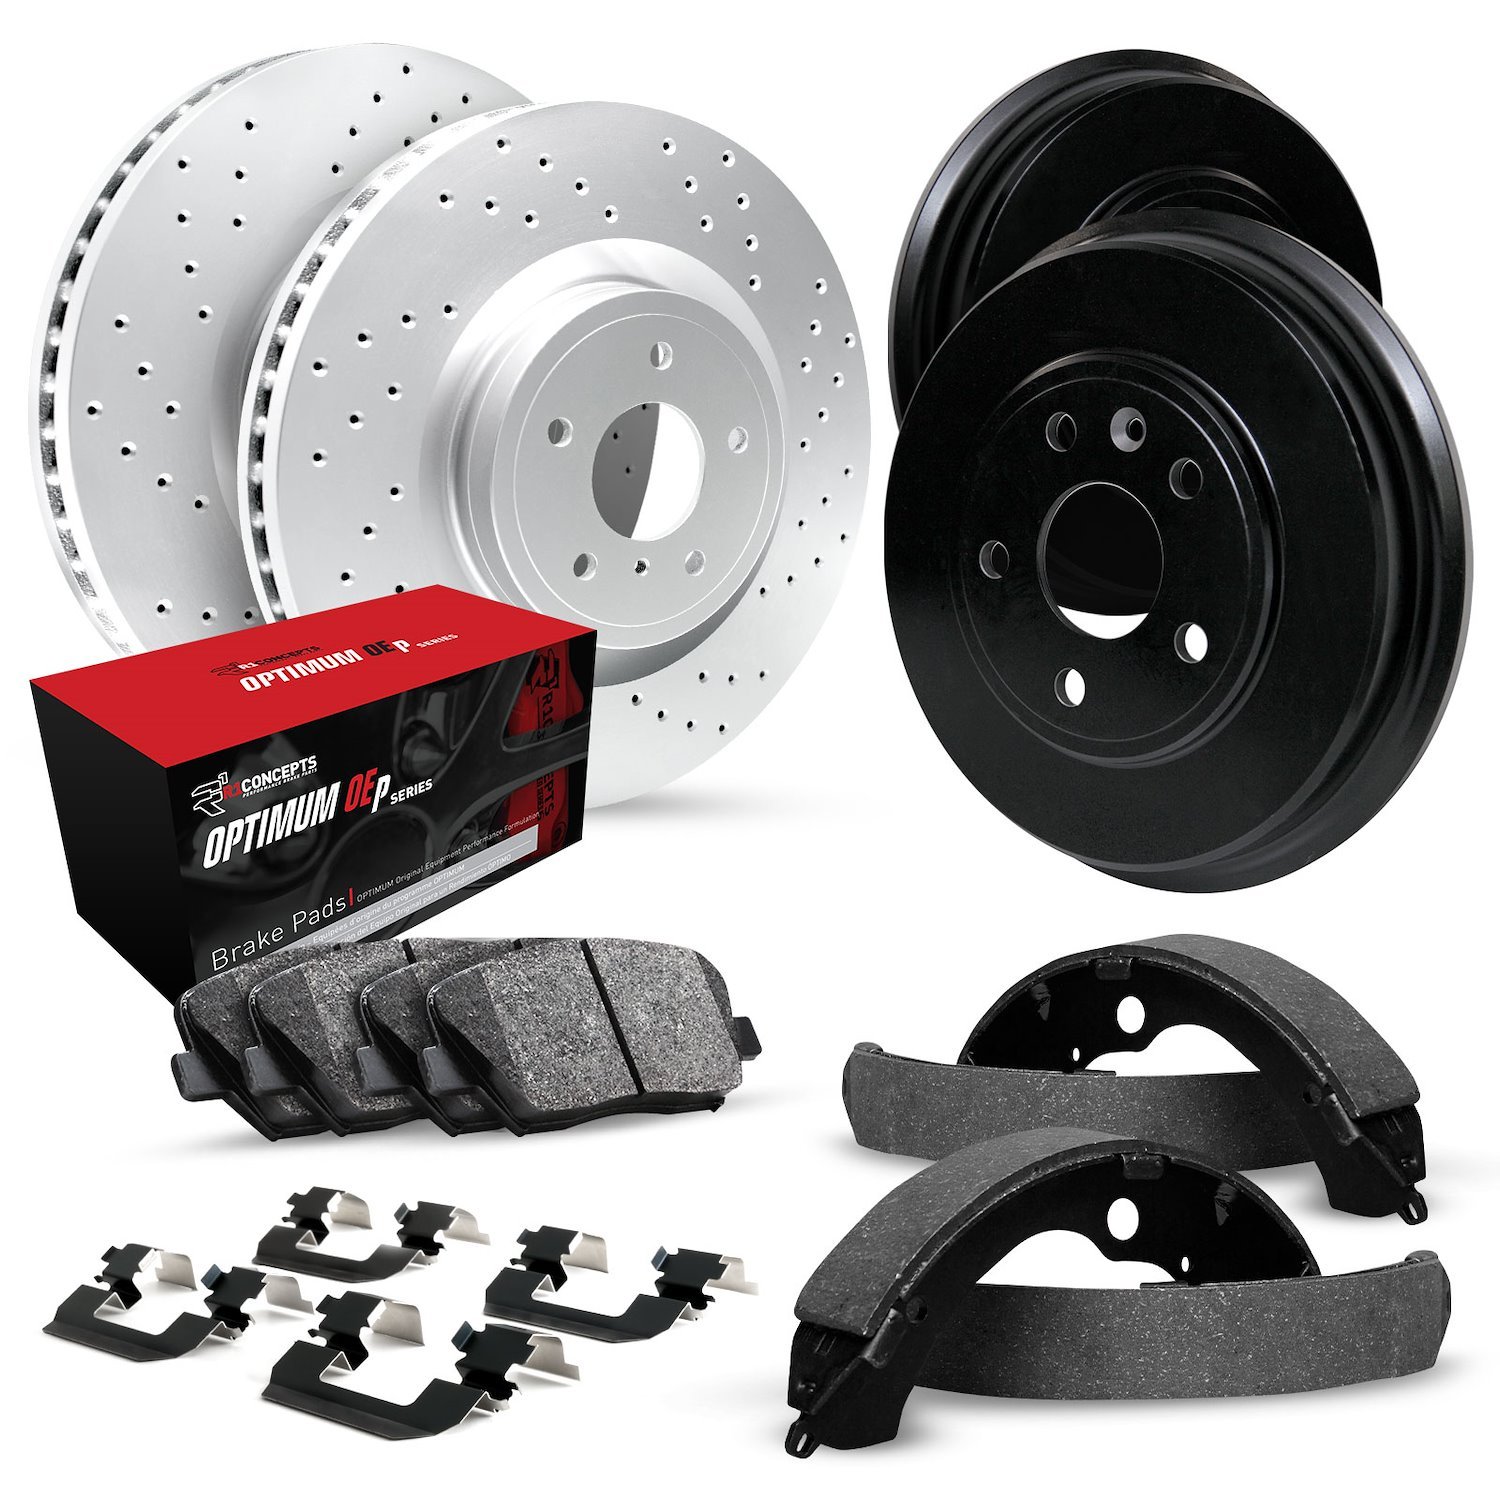 GEO-Carbon Drilled Brake Rotor & Drum Set w/Optimum OE Pads, Shoes, & Hardware, 1971-1976 GM, Position: Front & Rear